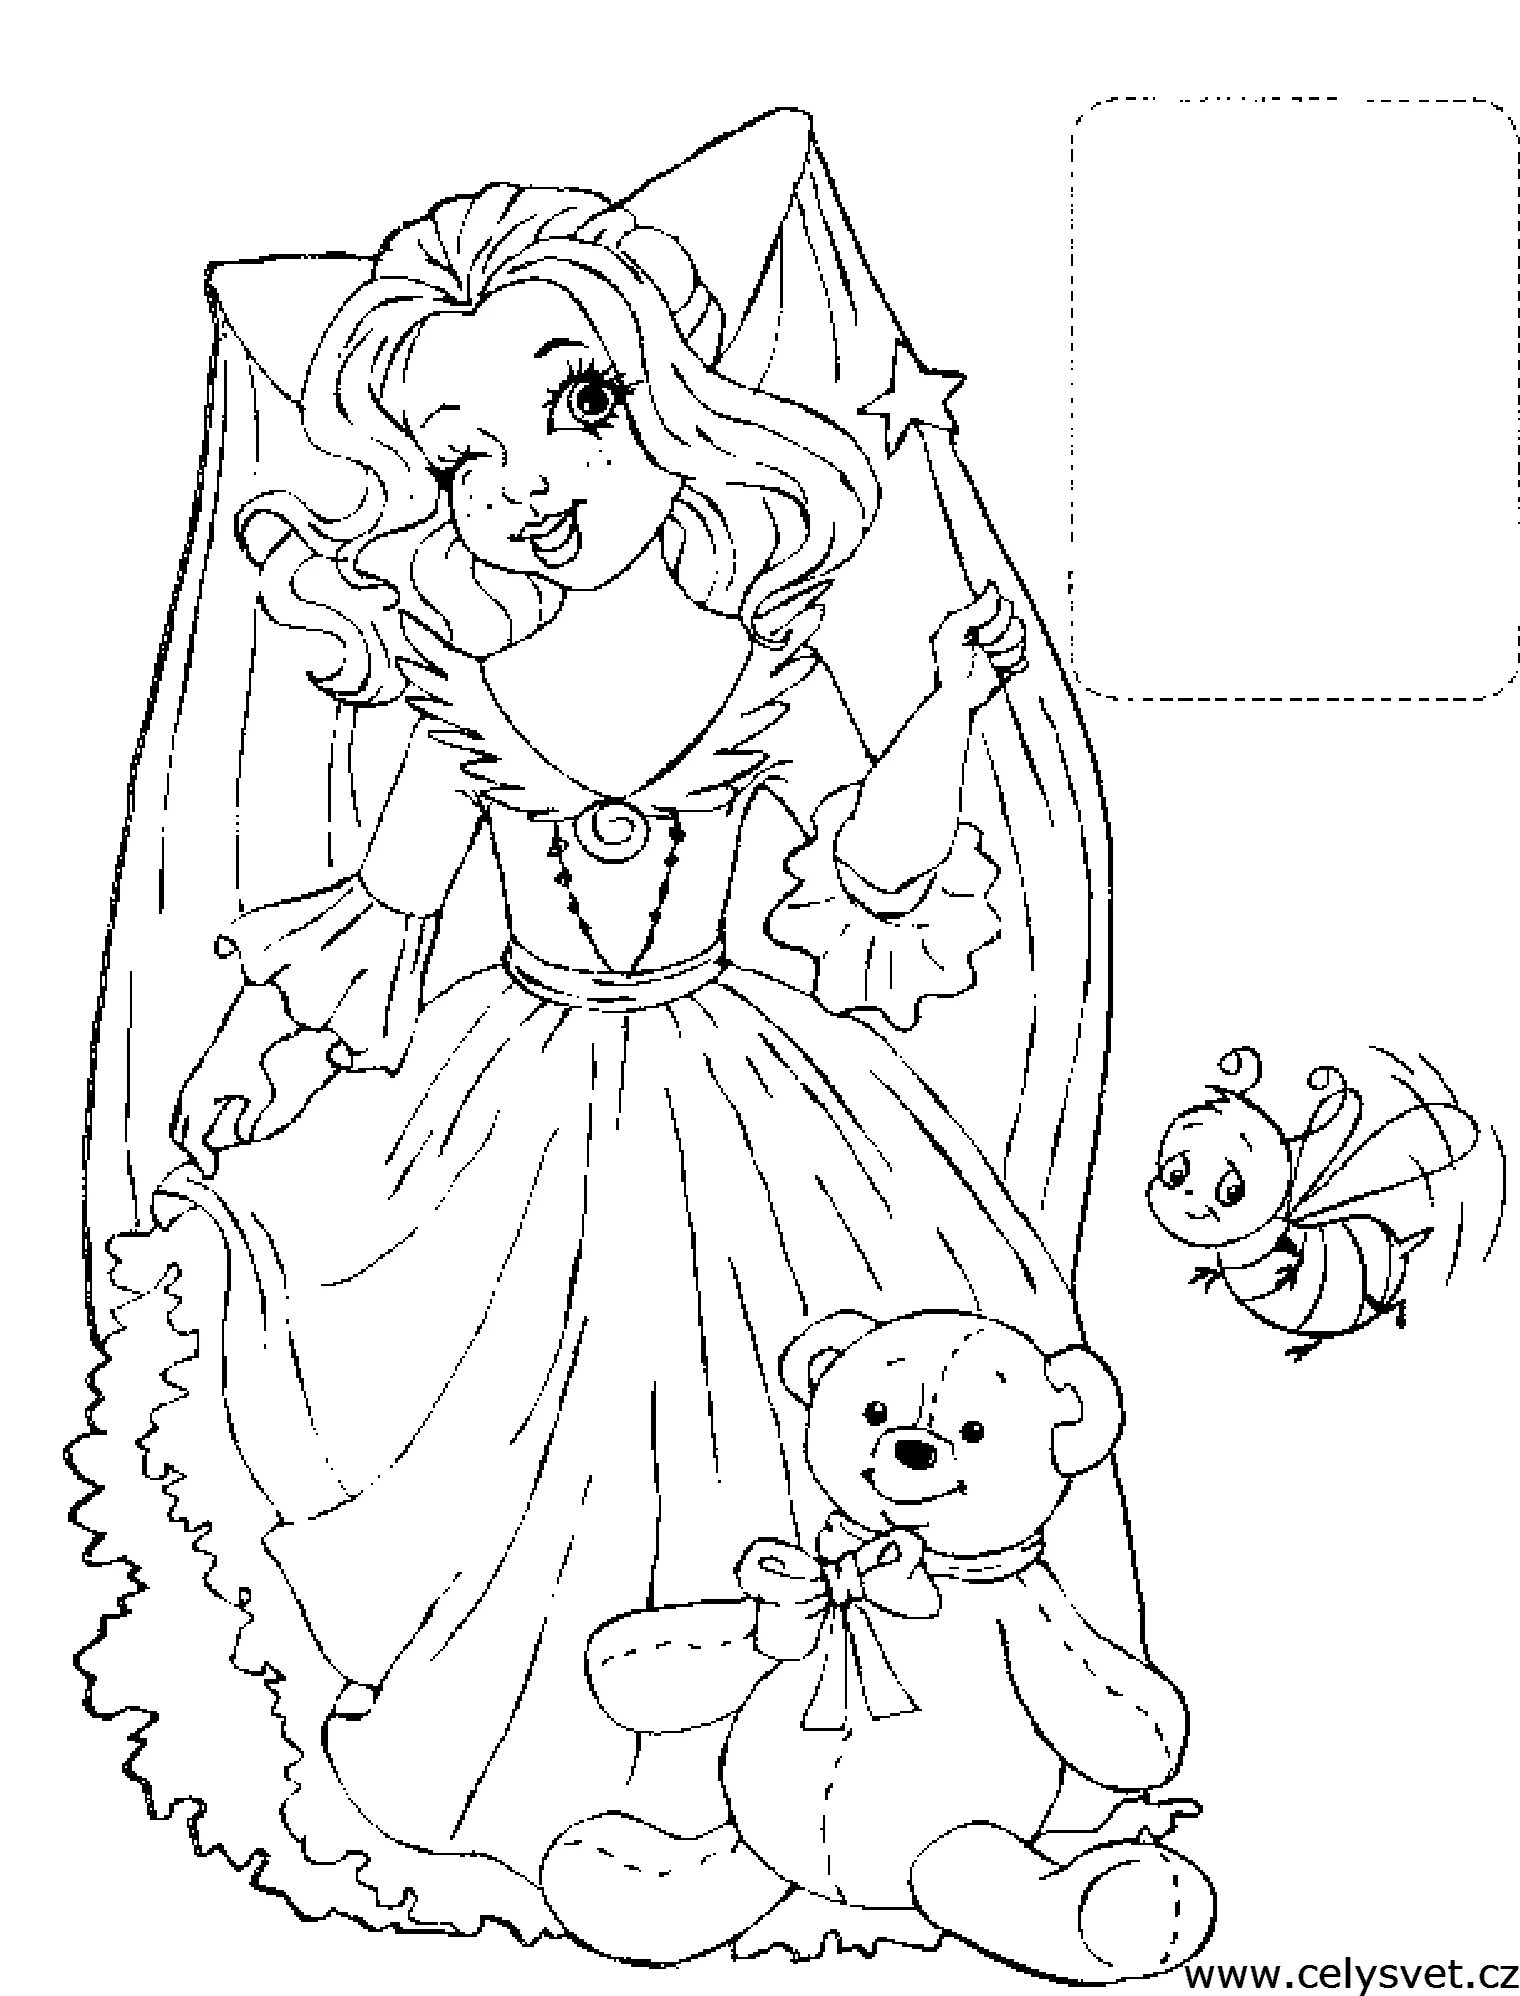 Decorated coloring book for girls 6-7 years old princess